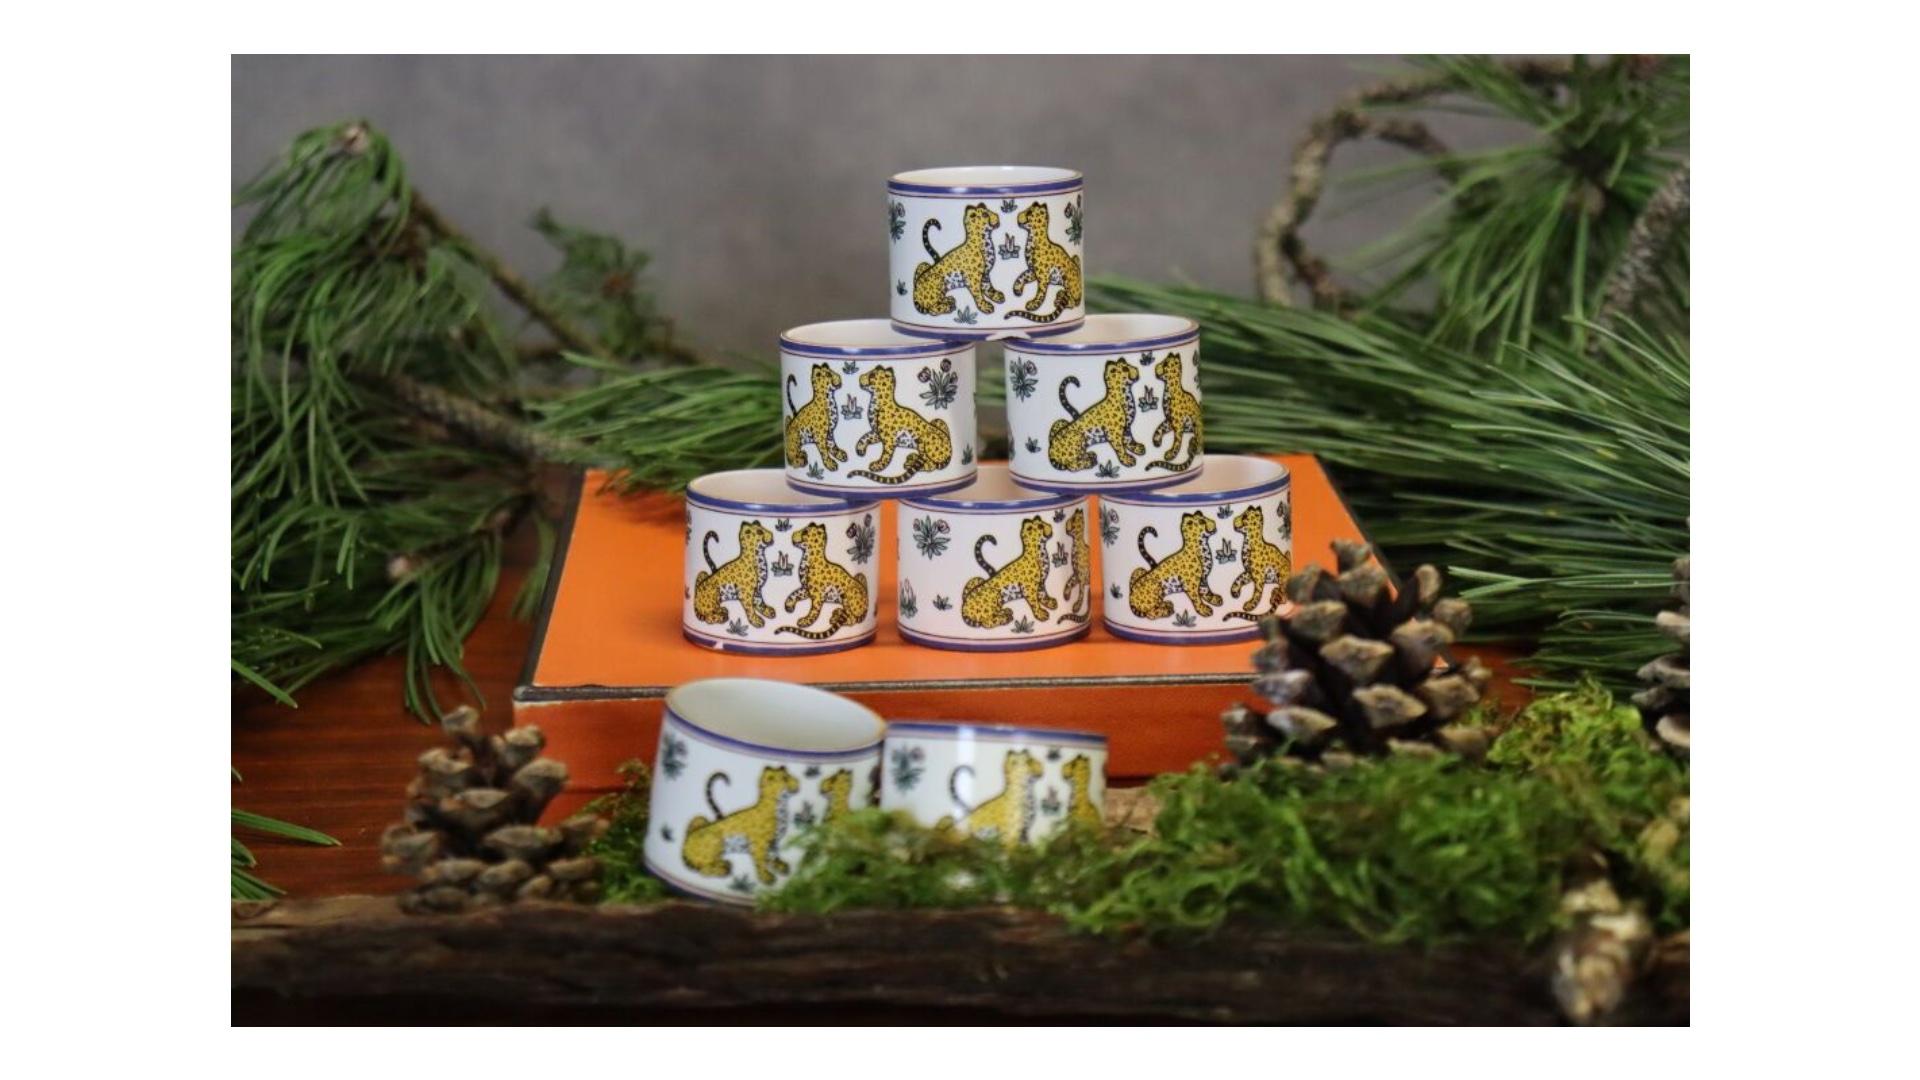 HERMES. HERMES. Suite of 8 napkin rings in enamel with panther decoration. Measures: Diameter : 4 cm. purchase.